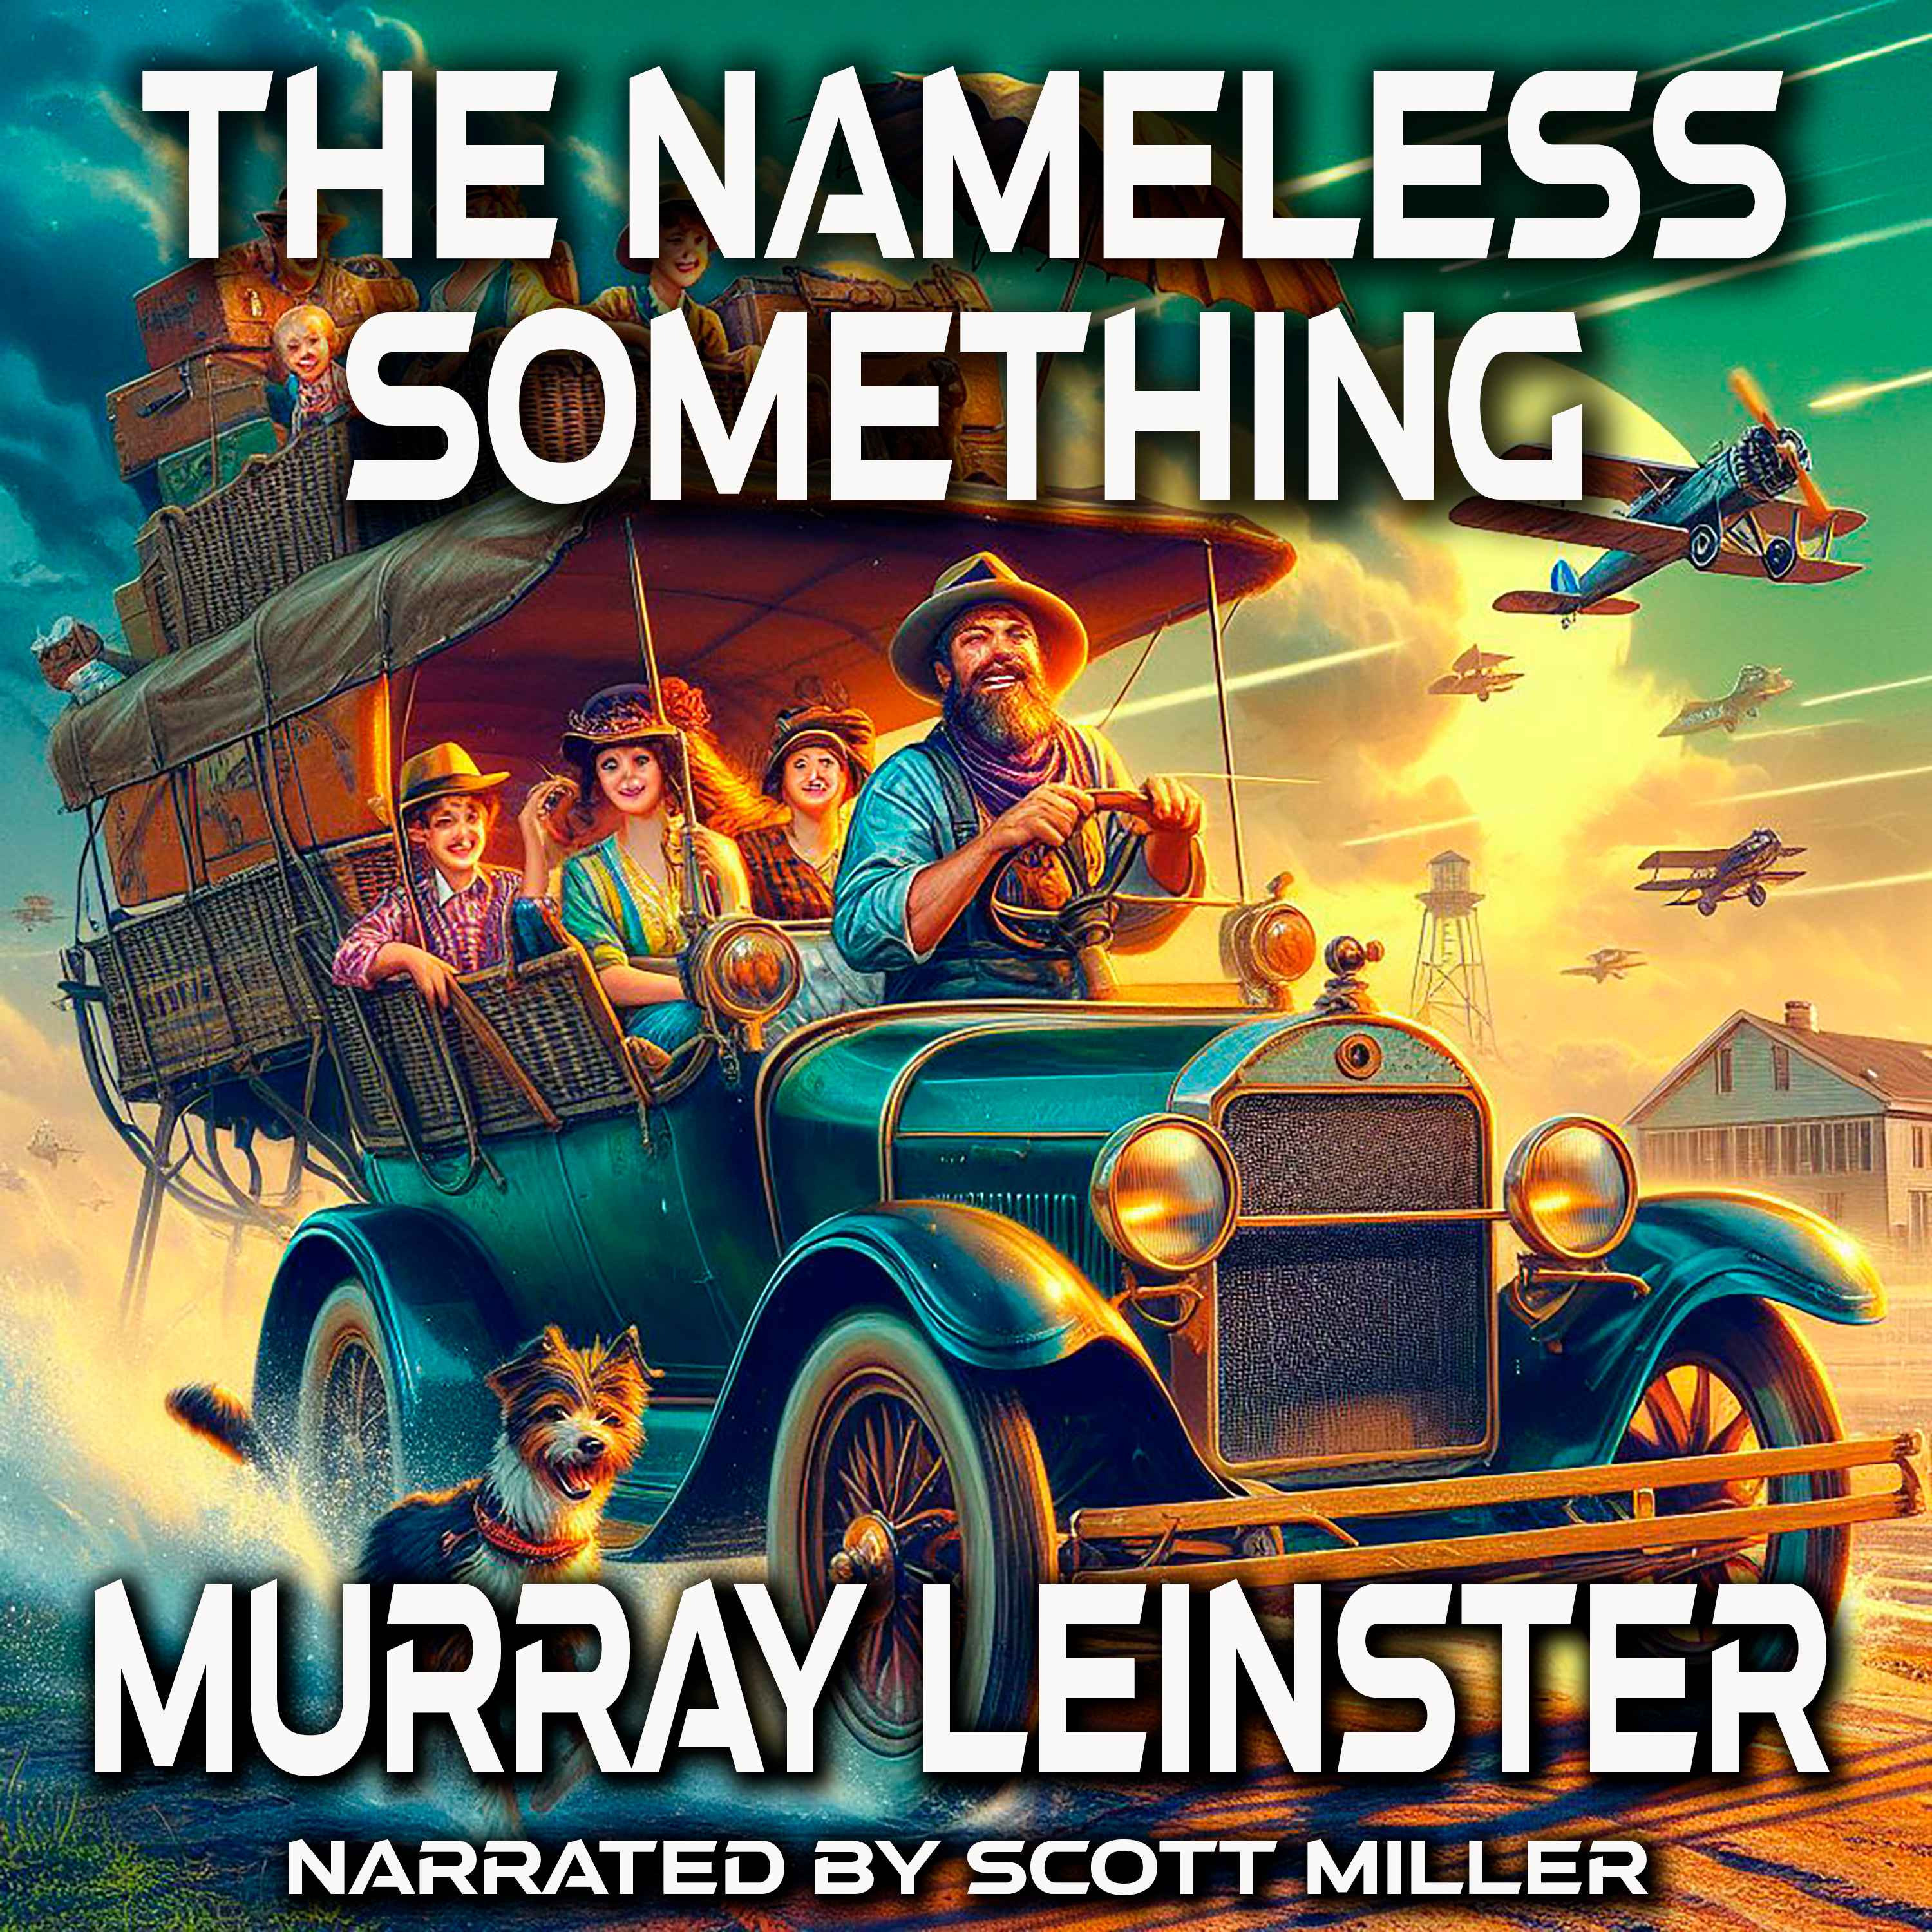 The Nameless Something by Murray Leinster - Murray Leinster Short Stories